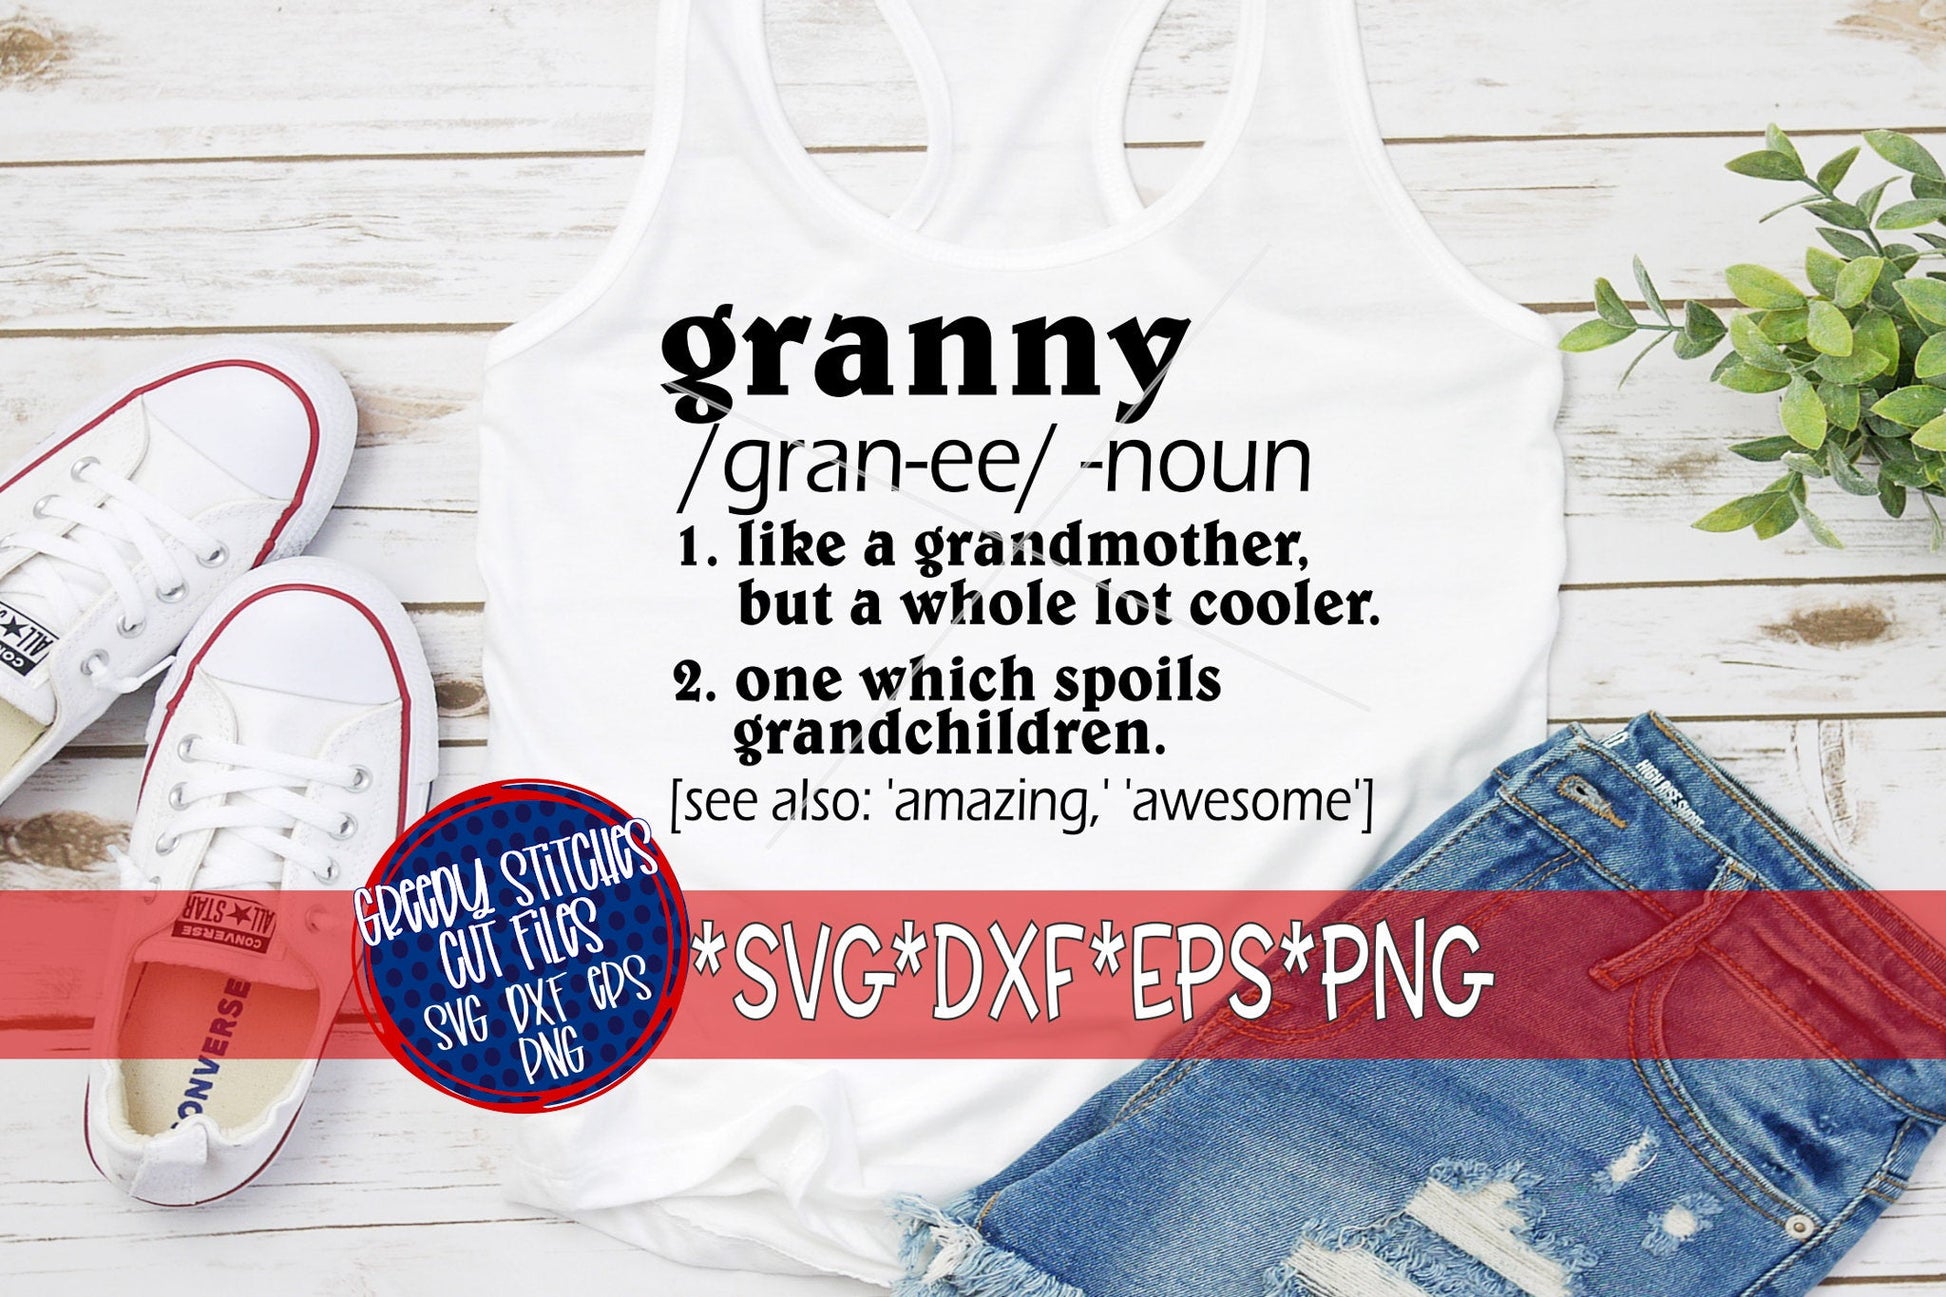 Mother&#39;s Day | Granny | Granny Definition svg, dxf, eps, png. Granny Definition SvG | Granny Definition DXF | Instant Download Cut Files.